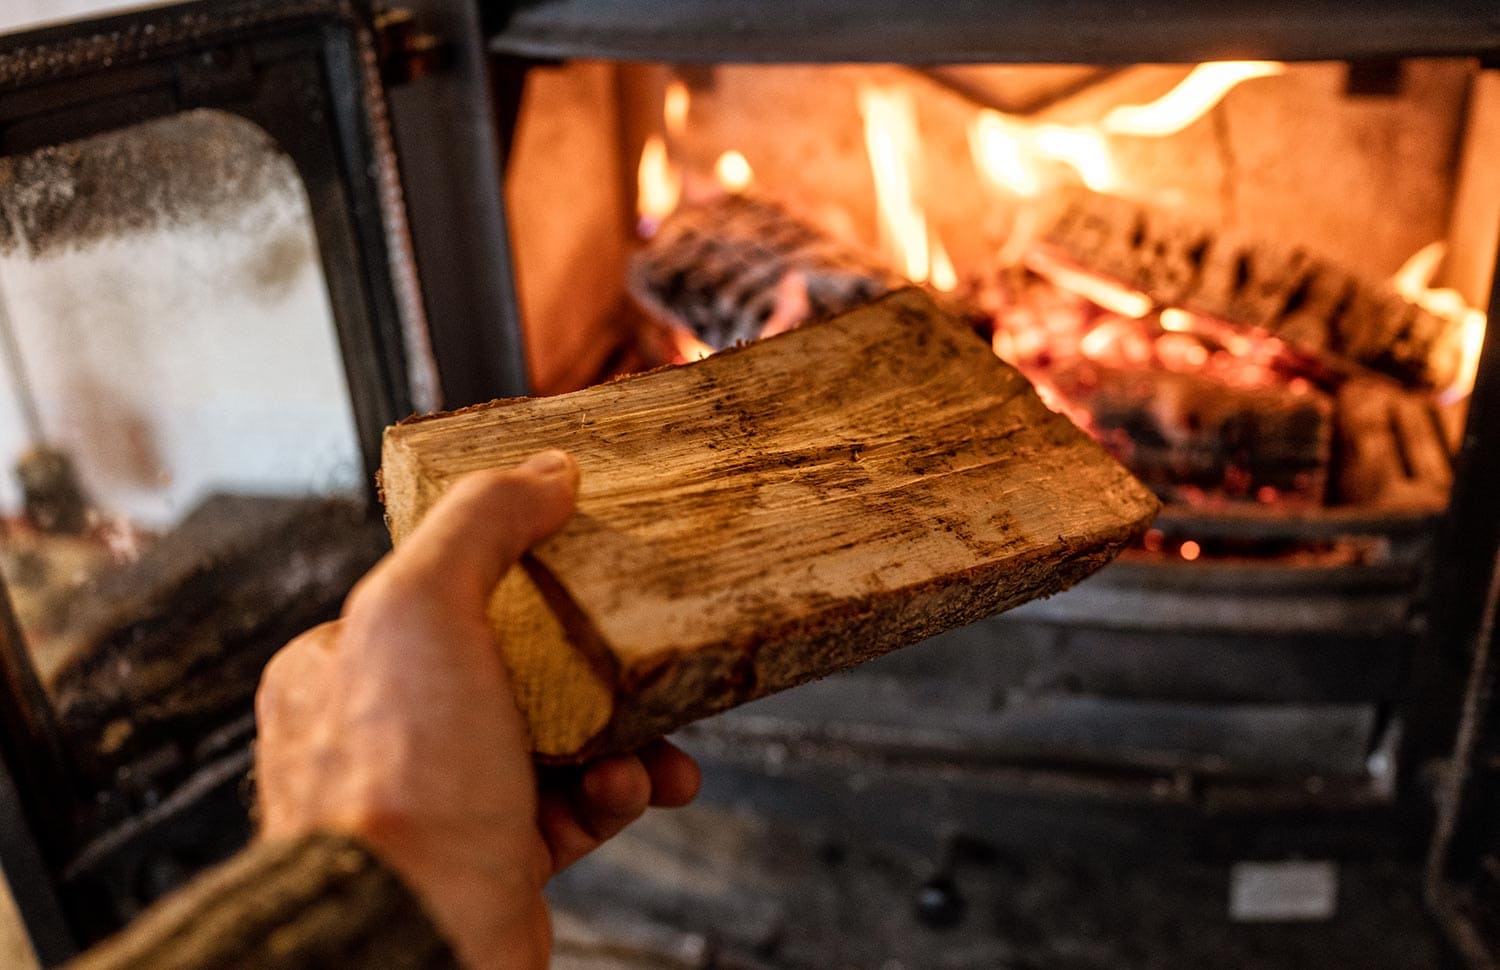 Putting a log into a wood burning stove